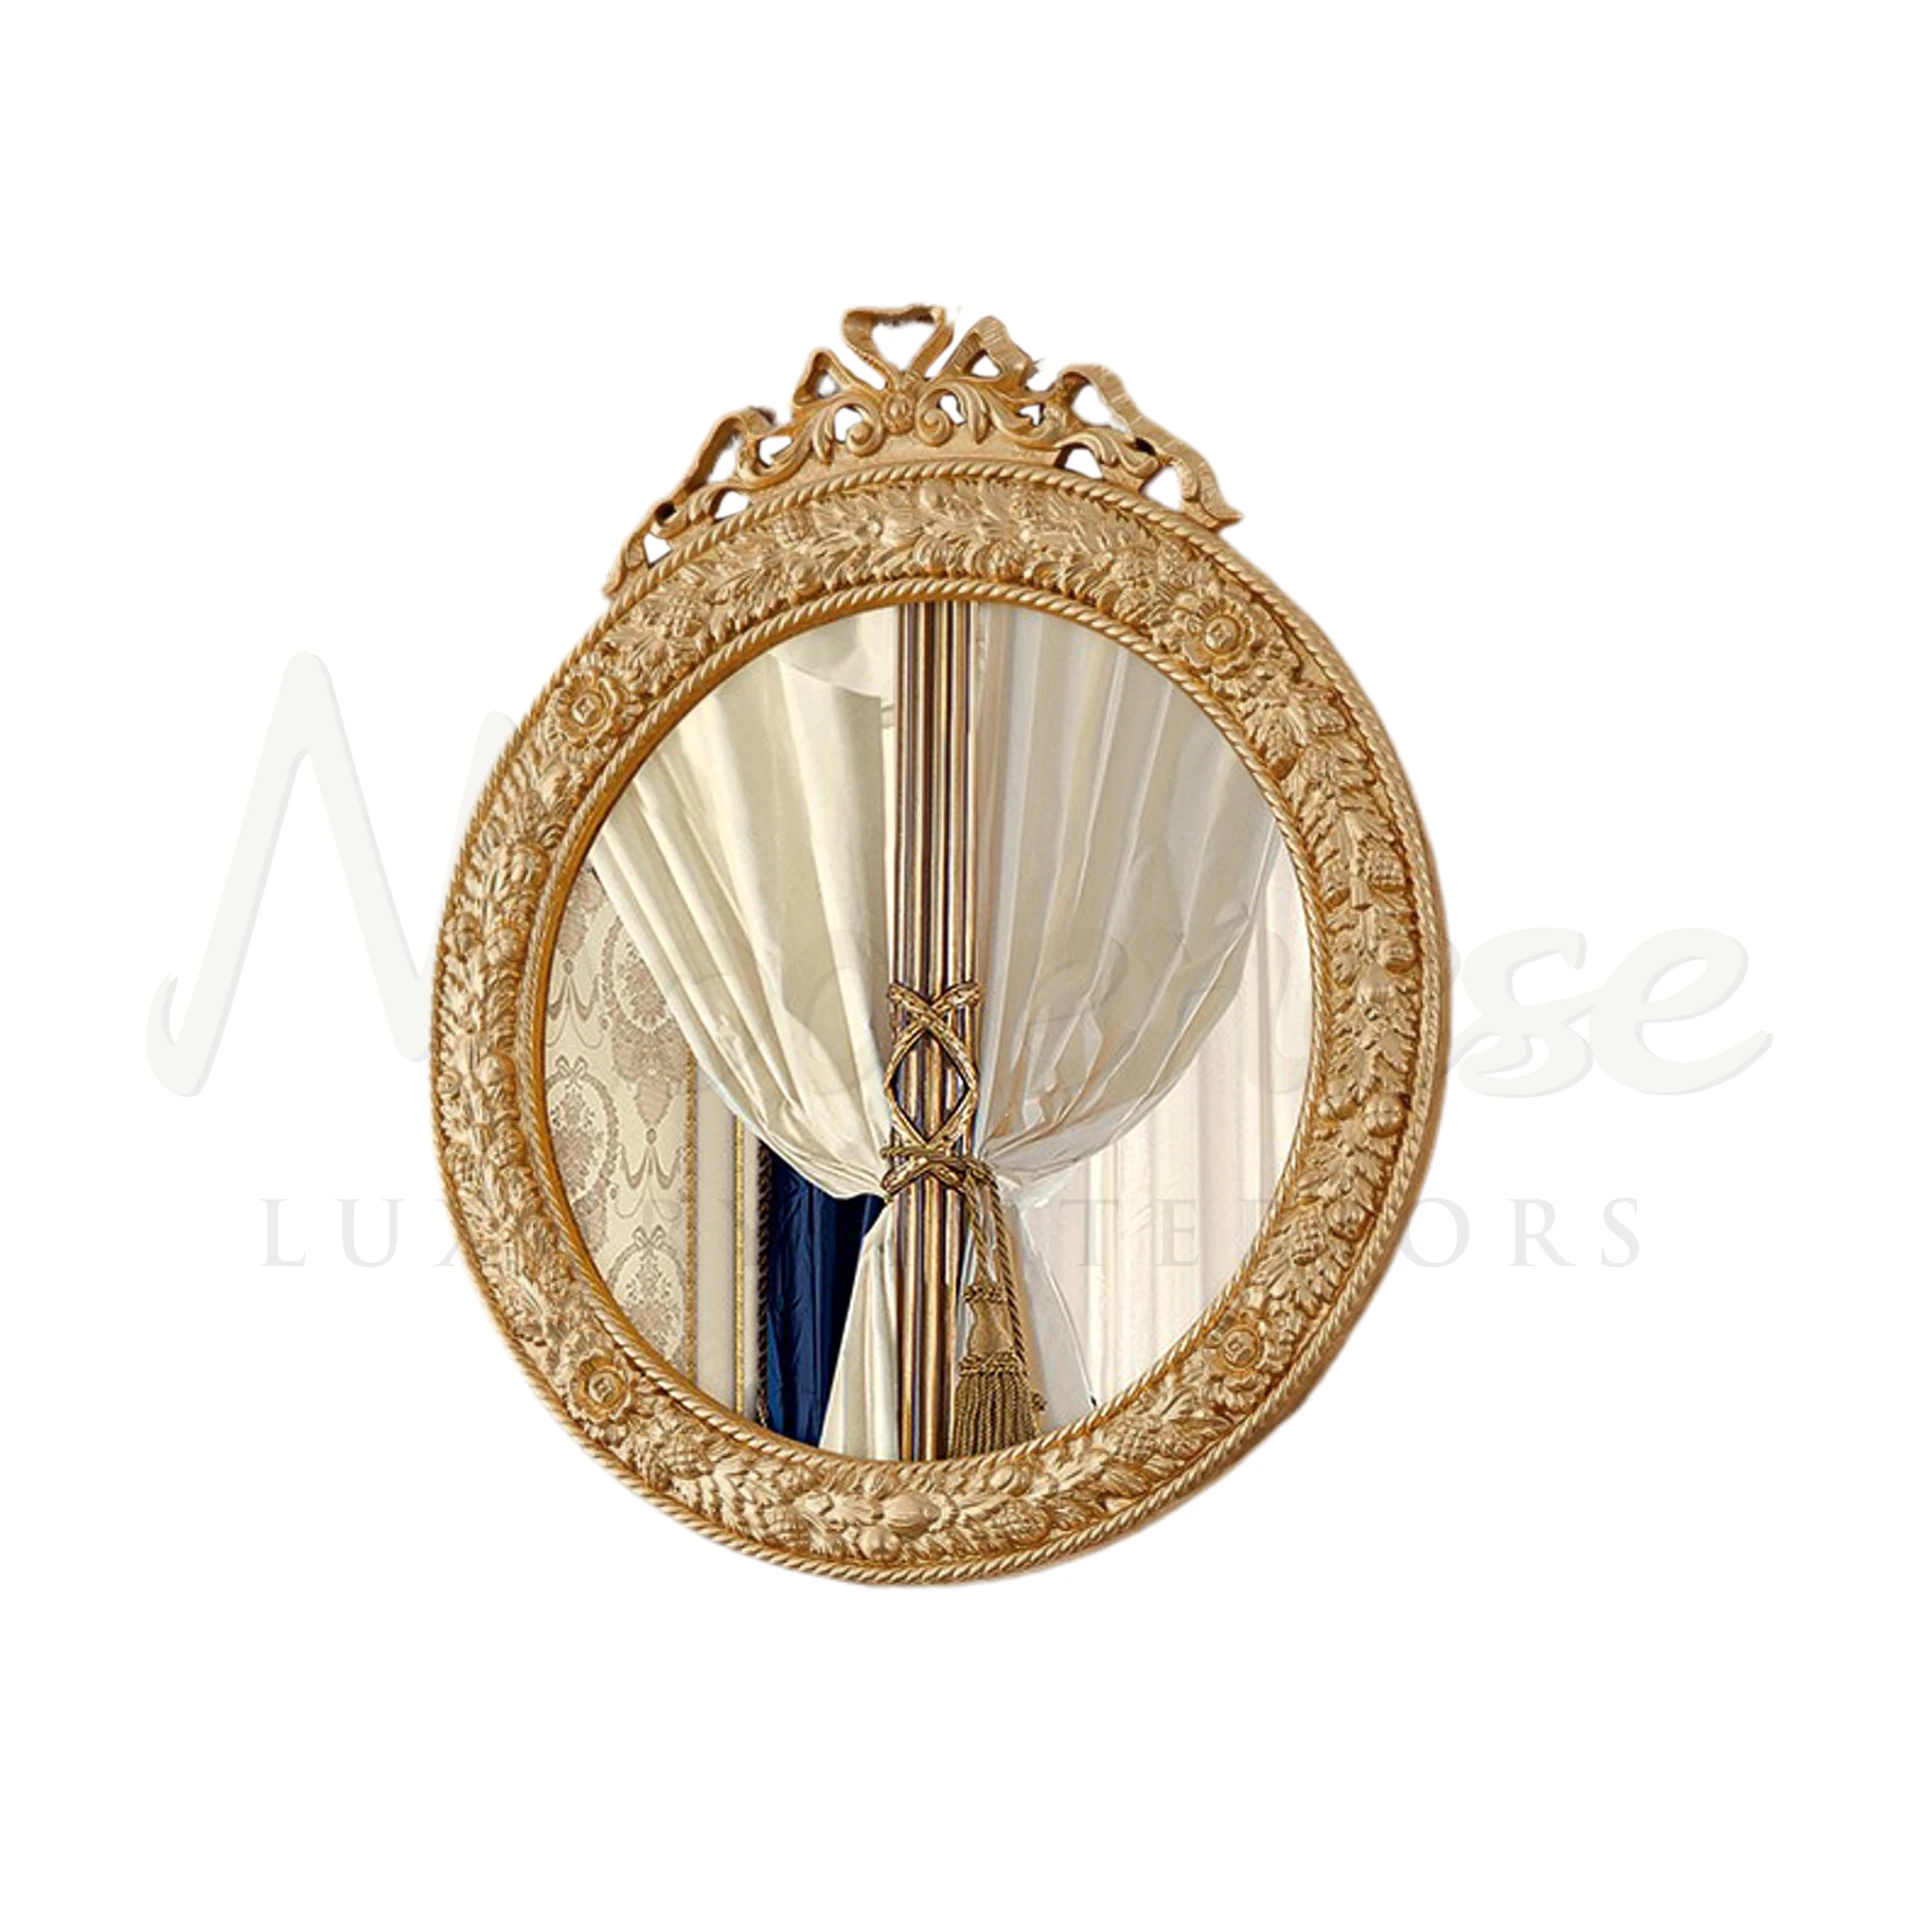 Bella Italian Mirror, epitomizing luxury with its carved frame, adds a touch of noble elegance to interior design and home decor.